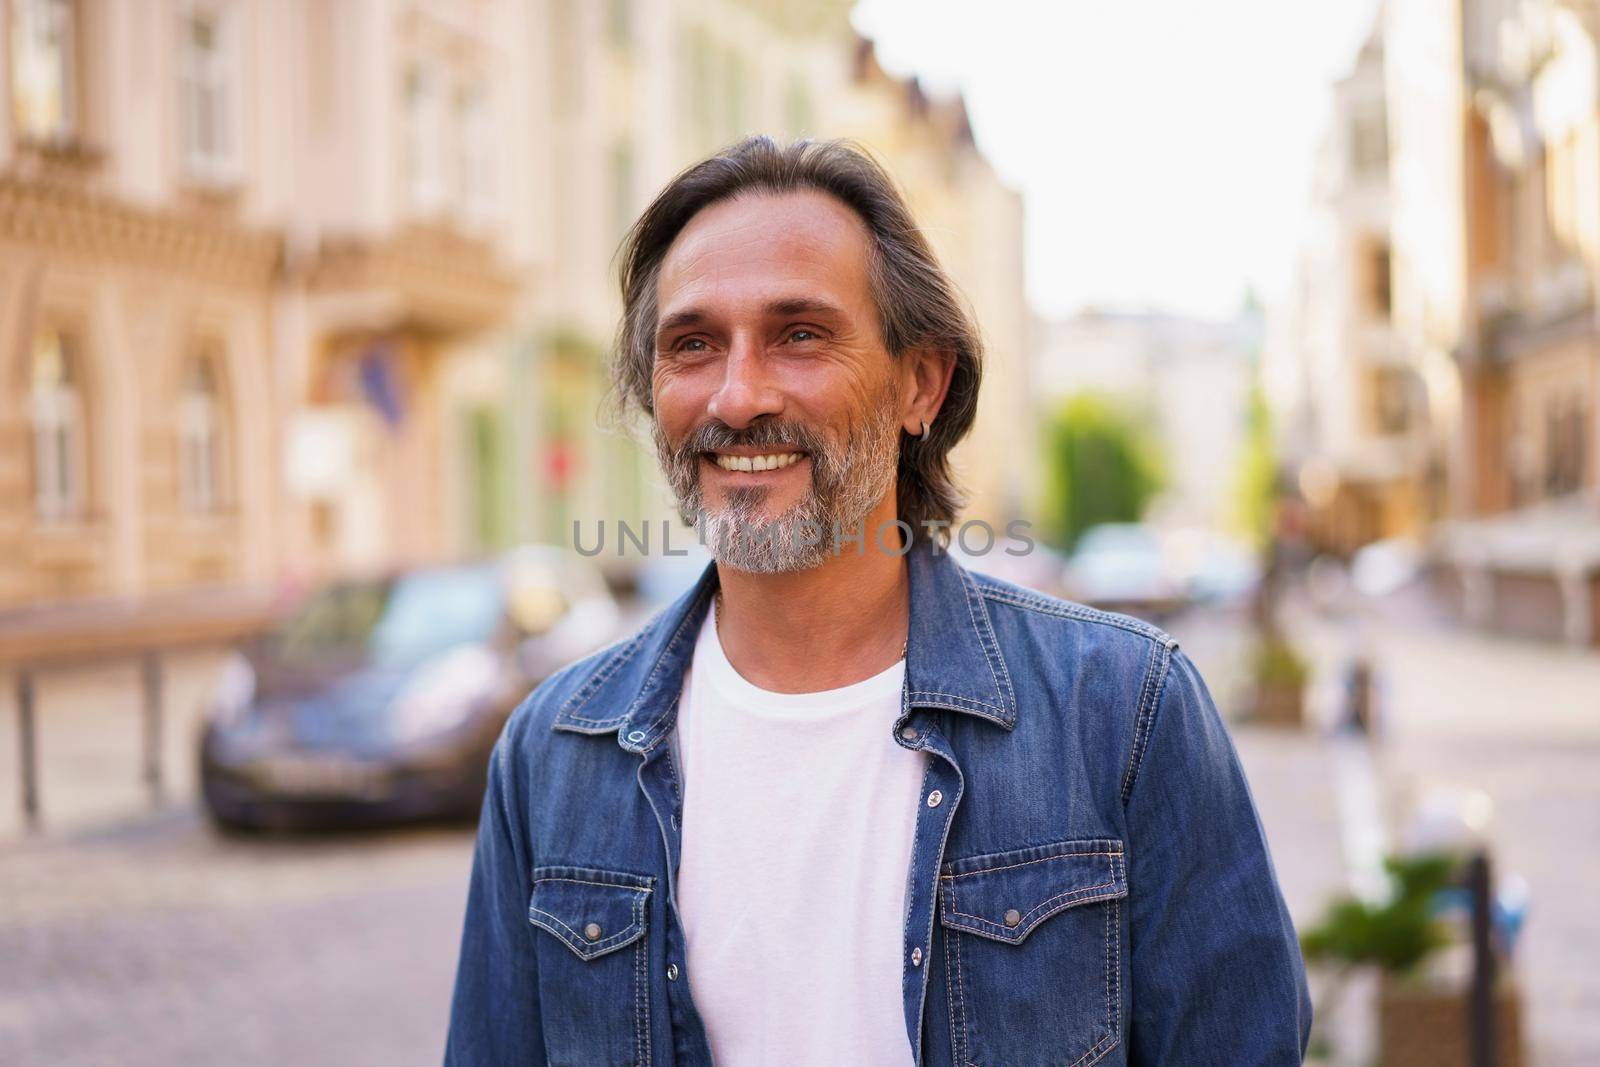 Well dressed happy mature man outdoors in old town city smiling wearing jeans shirt and white t-shirt. Happy mature man wearing sunglasses and looking sideways outdoor on a summer day.